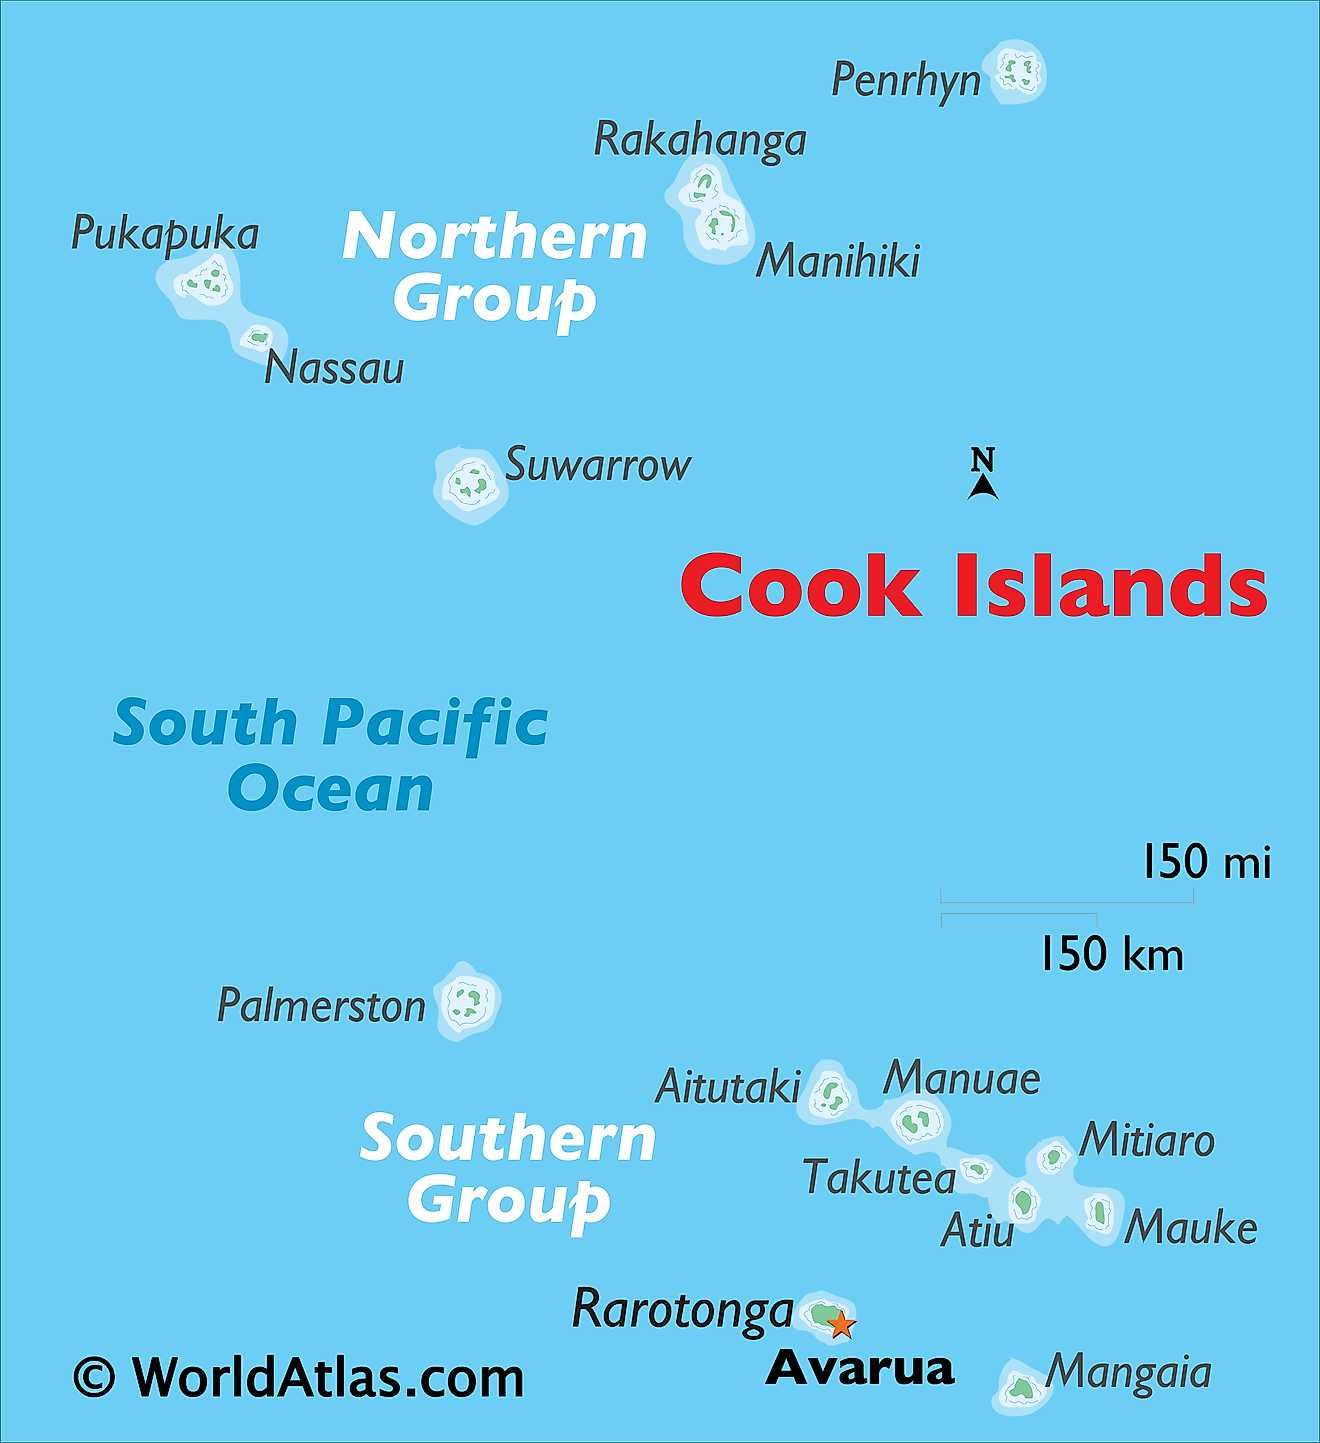 Cook Islands maps and facts